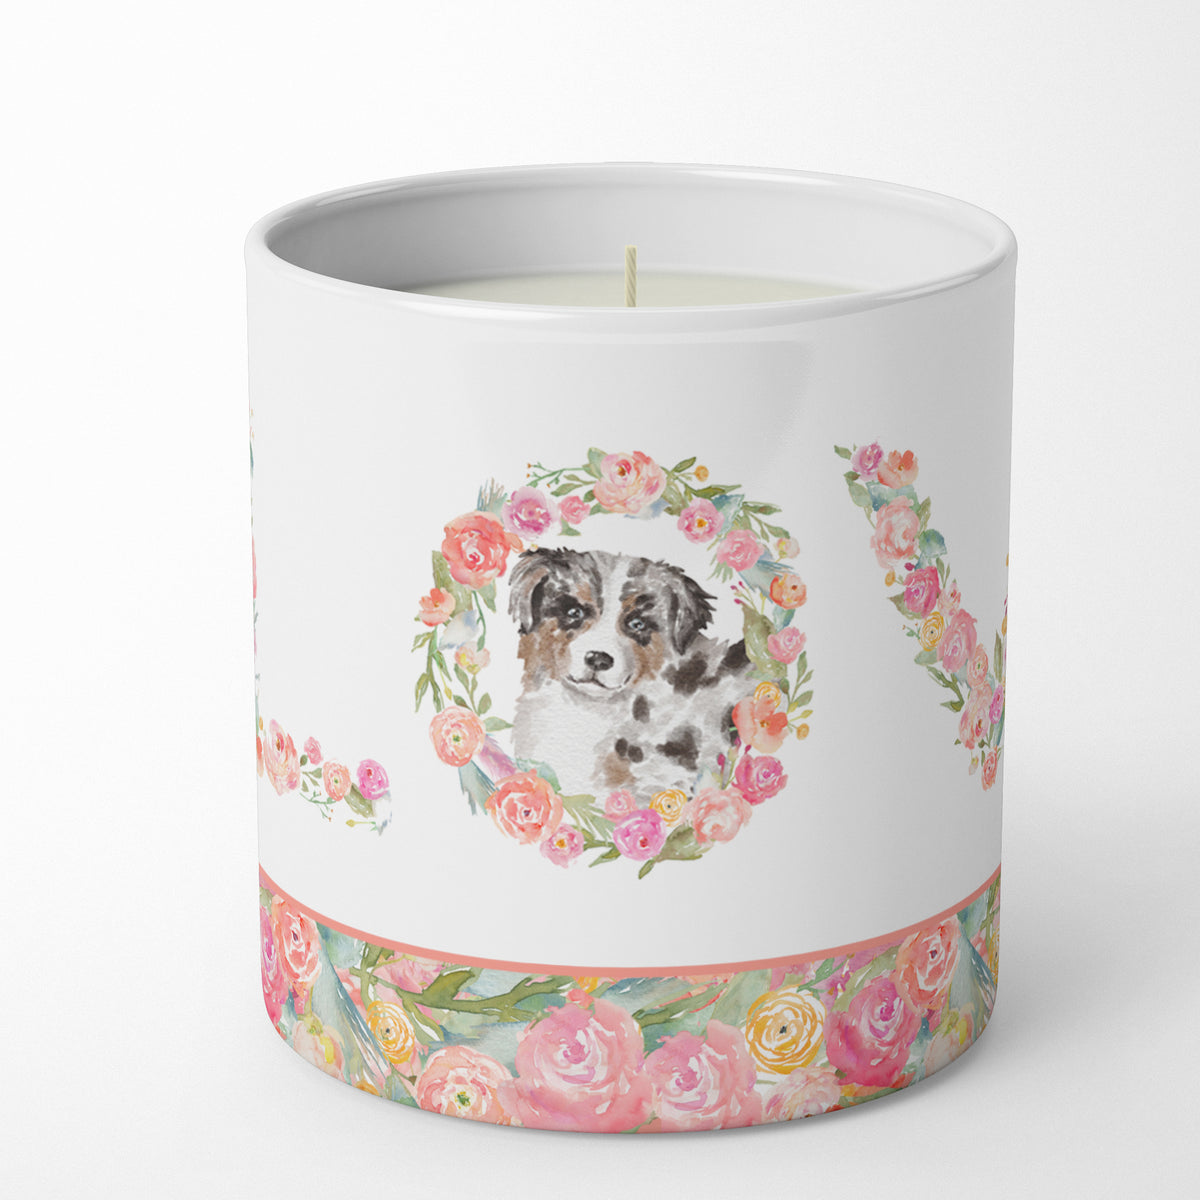 Buy this Australian Shepherd Blue Merle Puppy LOVE 10 oz Decorative Soy Candle